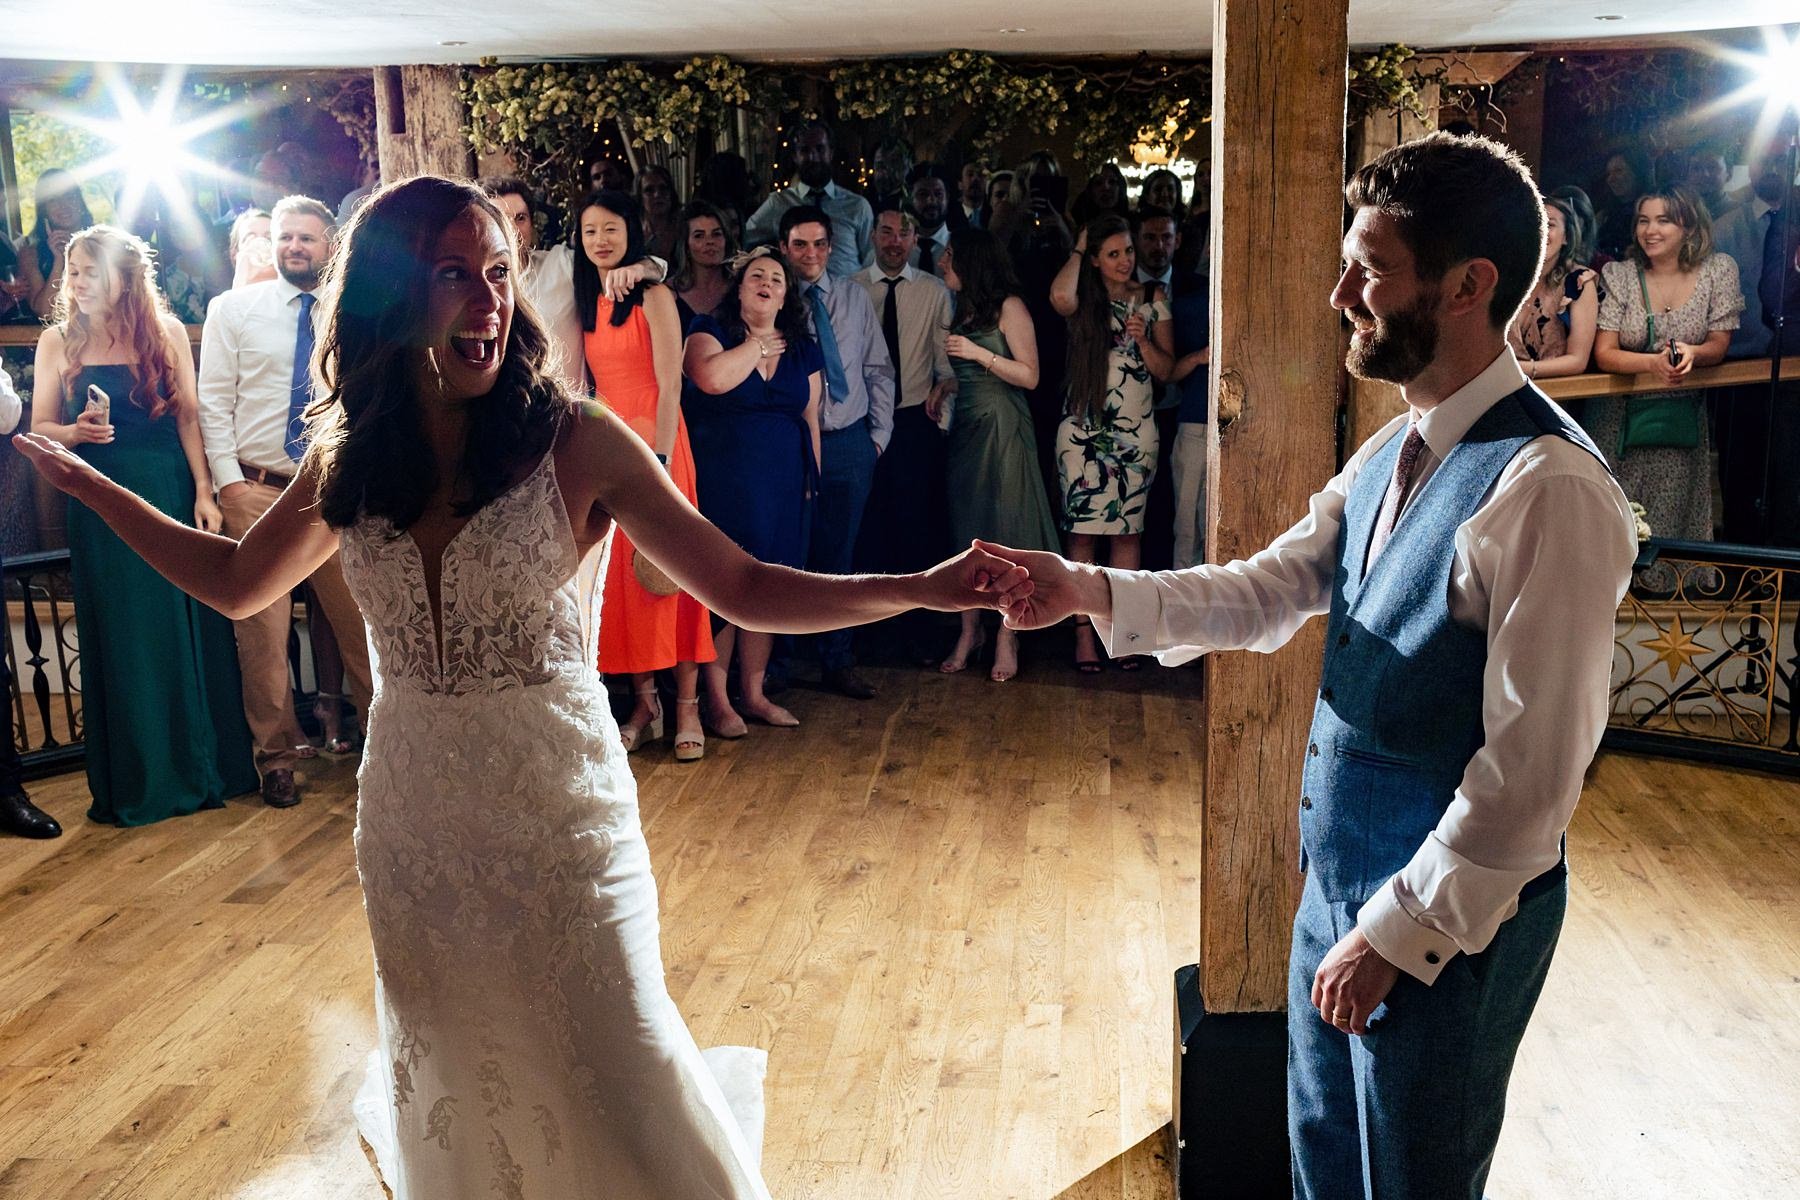 A bride leans back and puts out an arm as she dances with her new husband for their first dance at Bury Court Barn